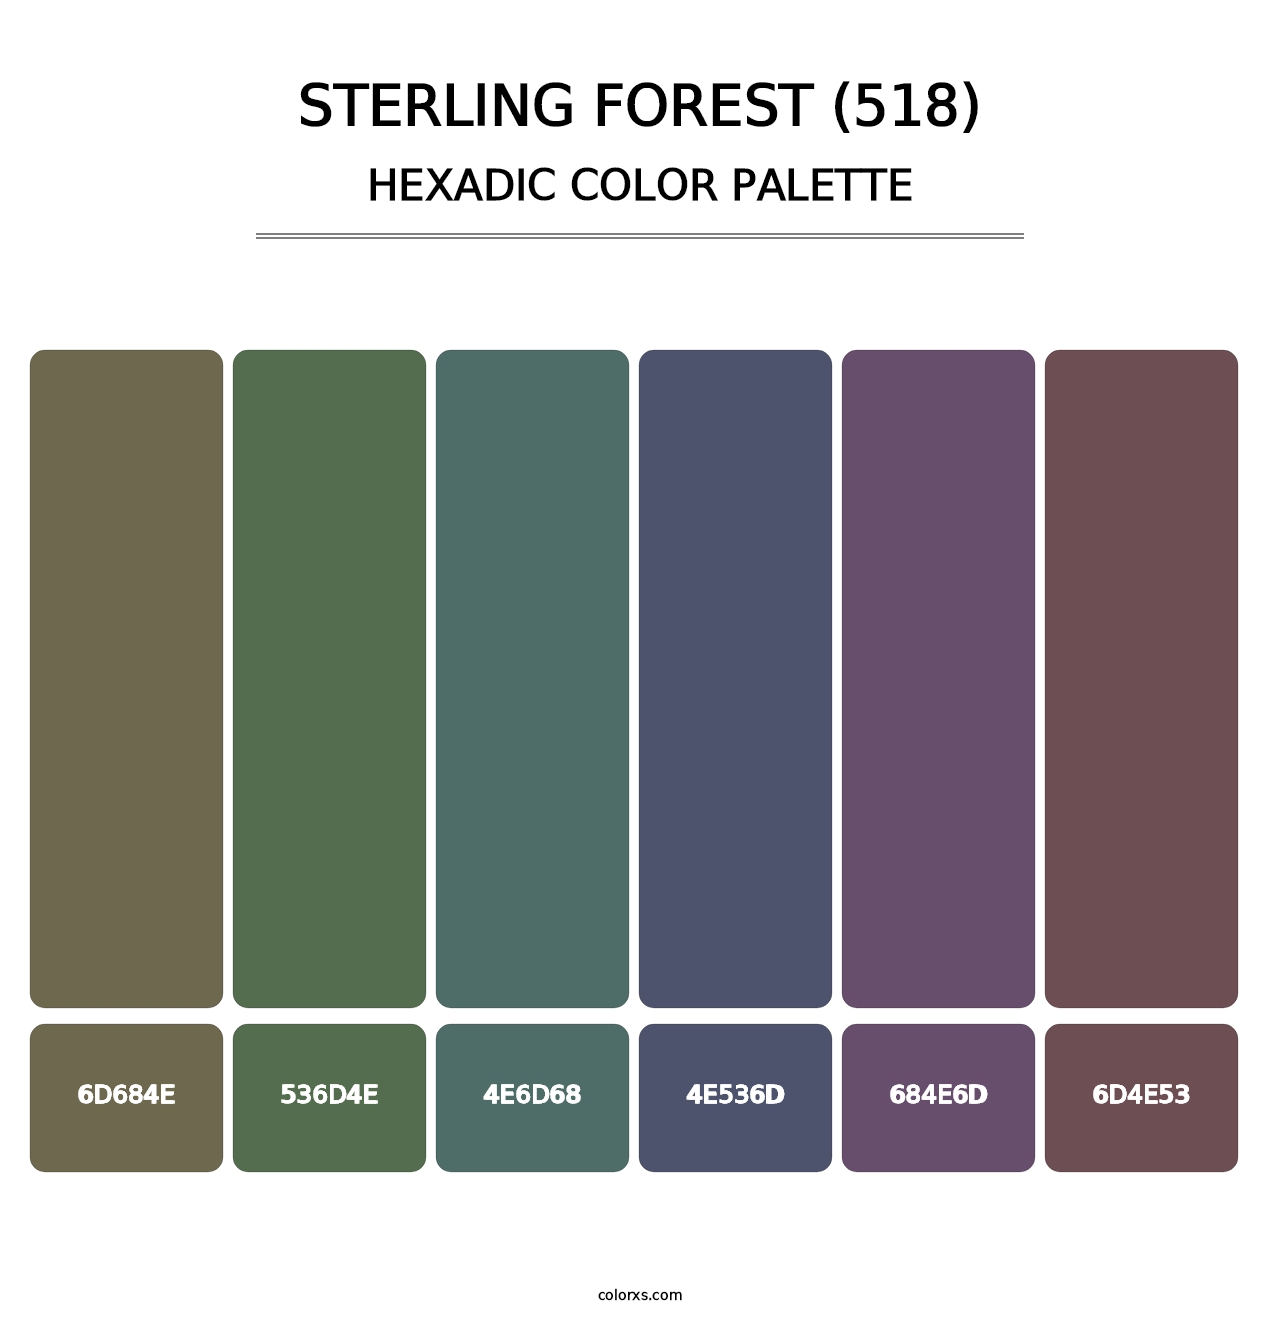 Sterling Forest (518) - Hexadic Color Palette